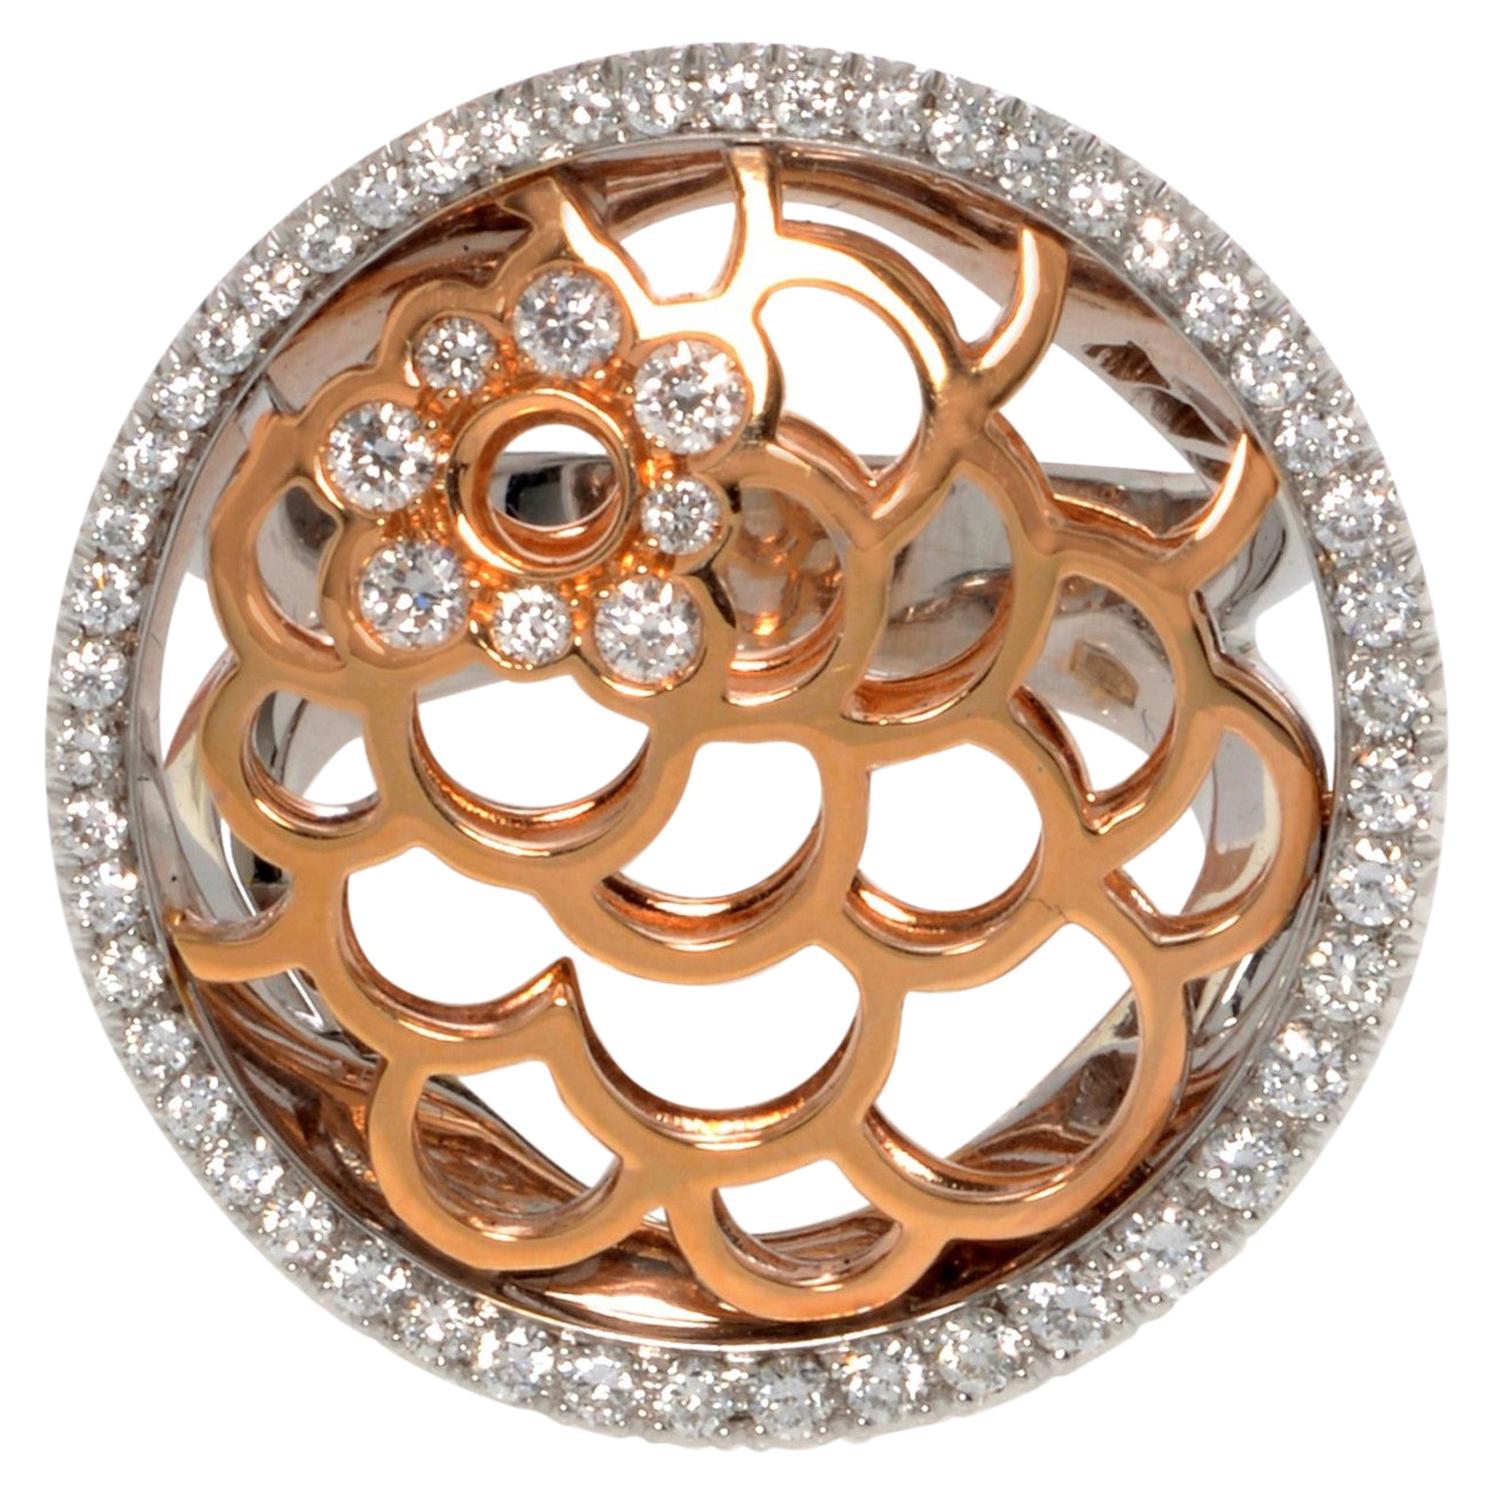 Luca Carati Diamond Cocktail Ring 18K White & Rose Gold 1.33Cttw For Sale